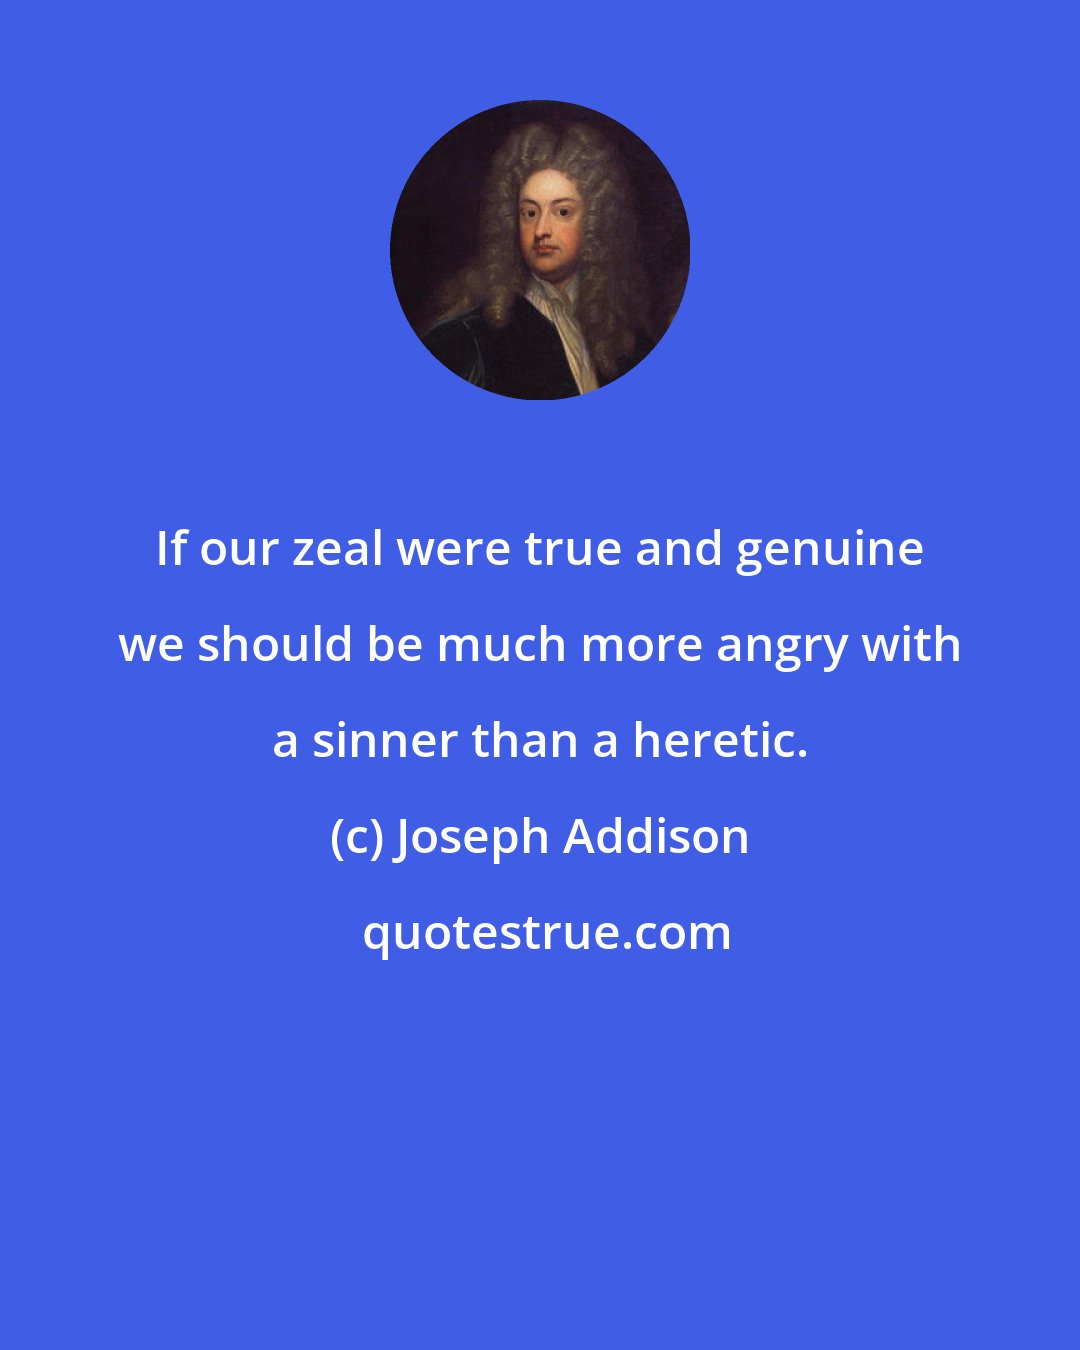 Joseph Addison: If our zeal were true and genuine we should be much more angry with a sinner than a heretic.